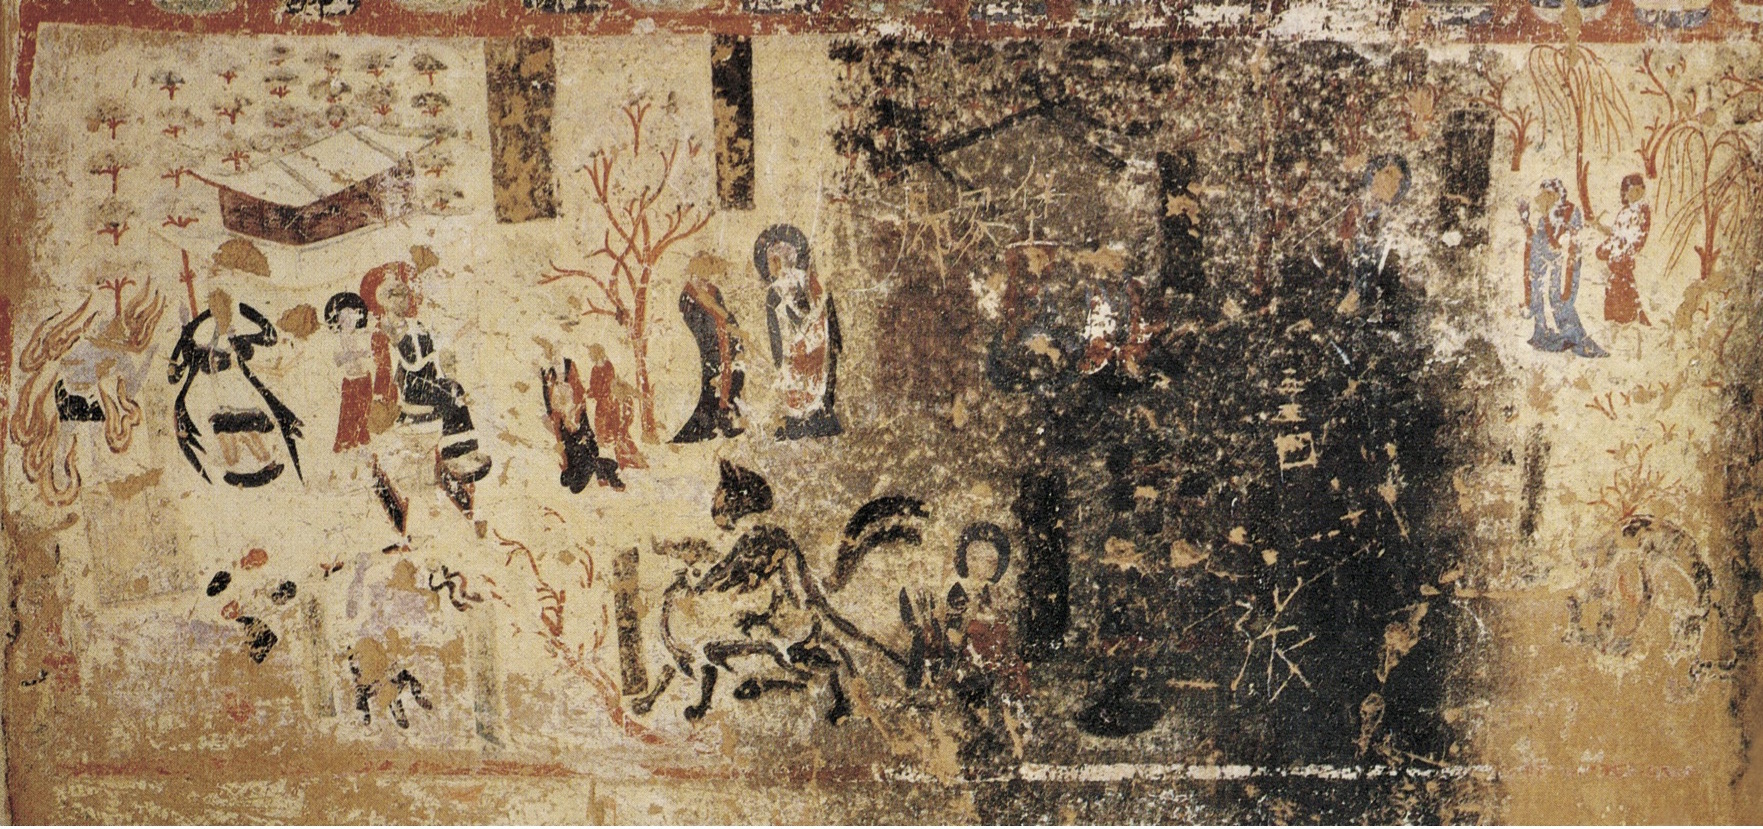 Figure 1: The fresco of "Subduing the Demons", Cave 12 of the West Thousand Buddha Caves, mid-6th century